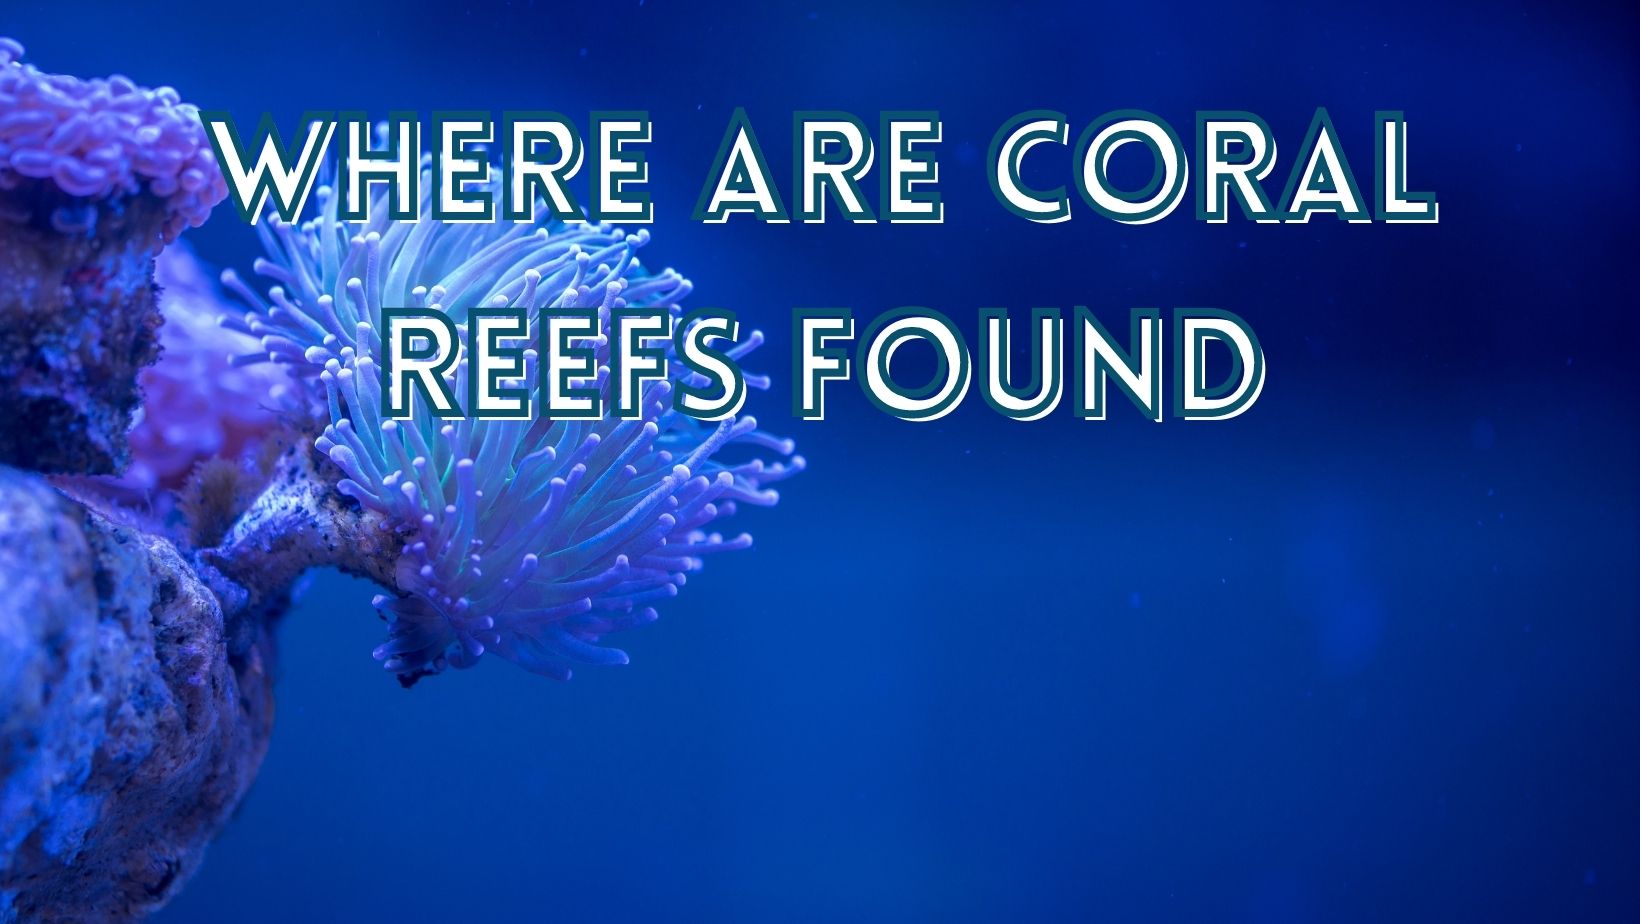 Where are coral reefs found